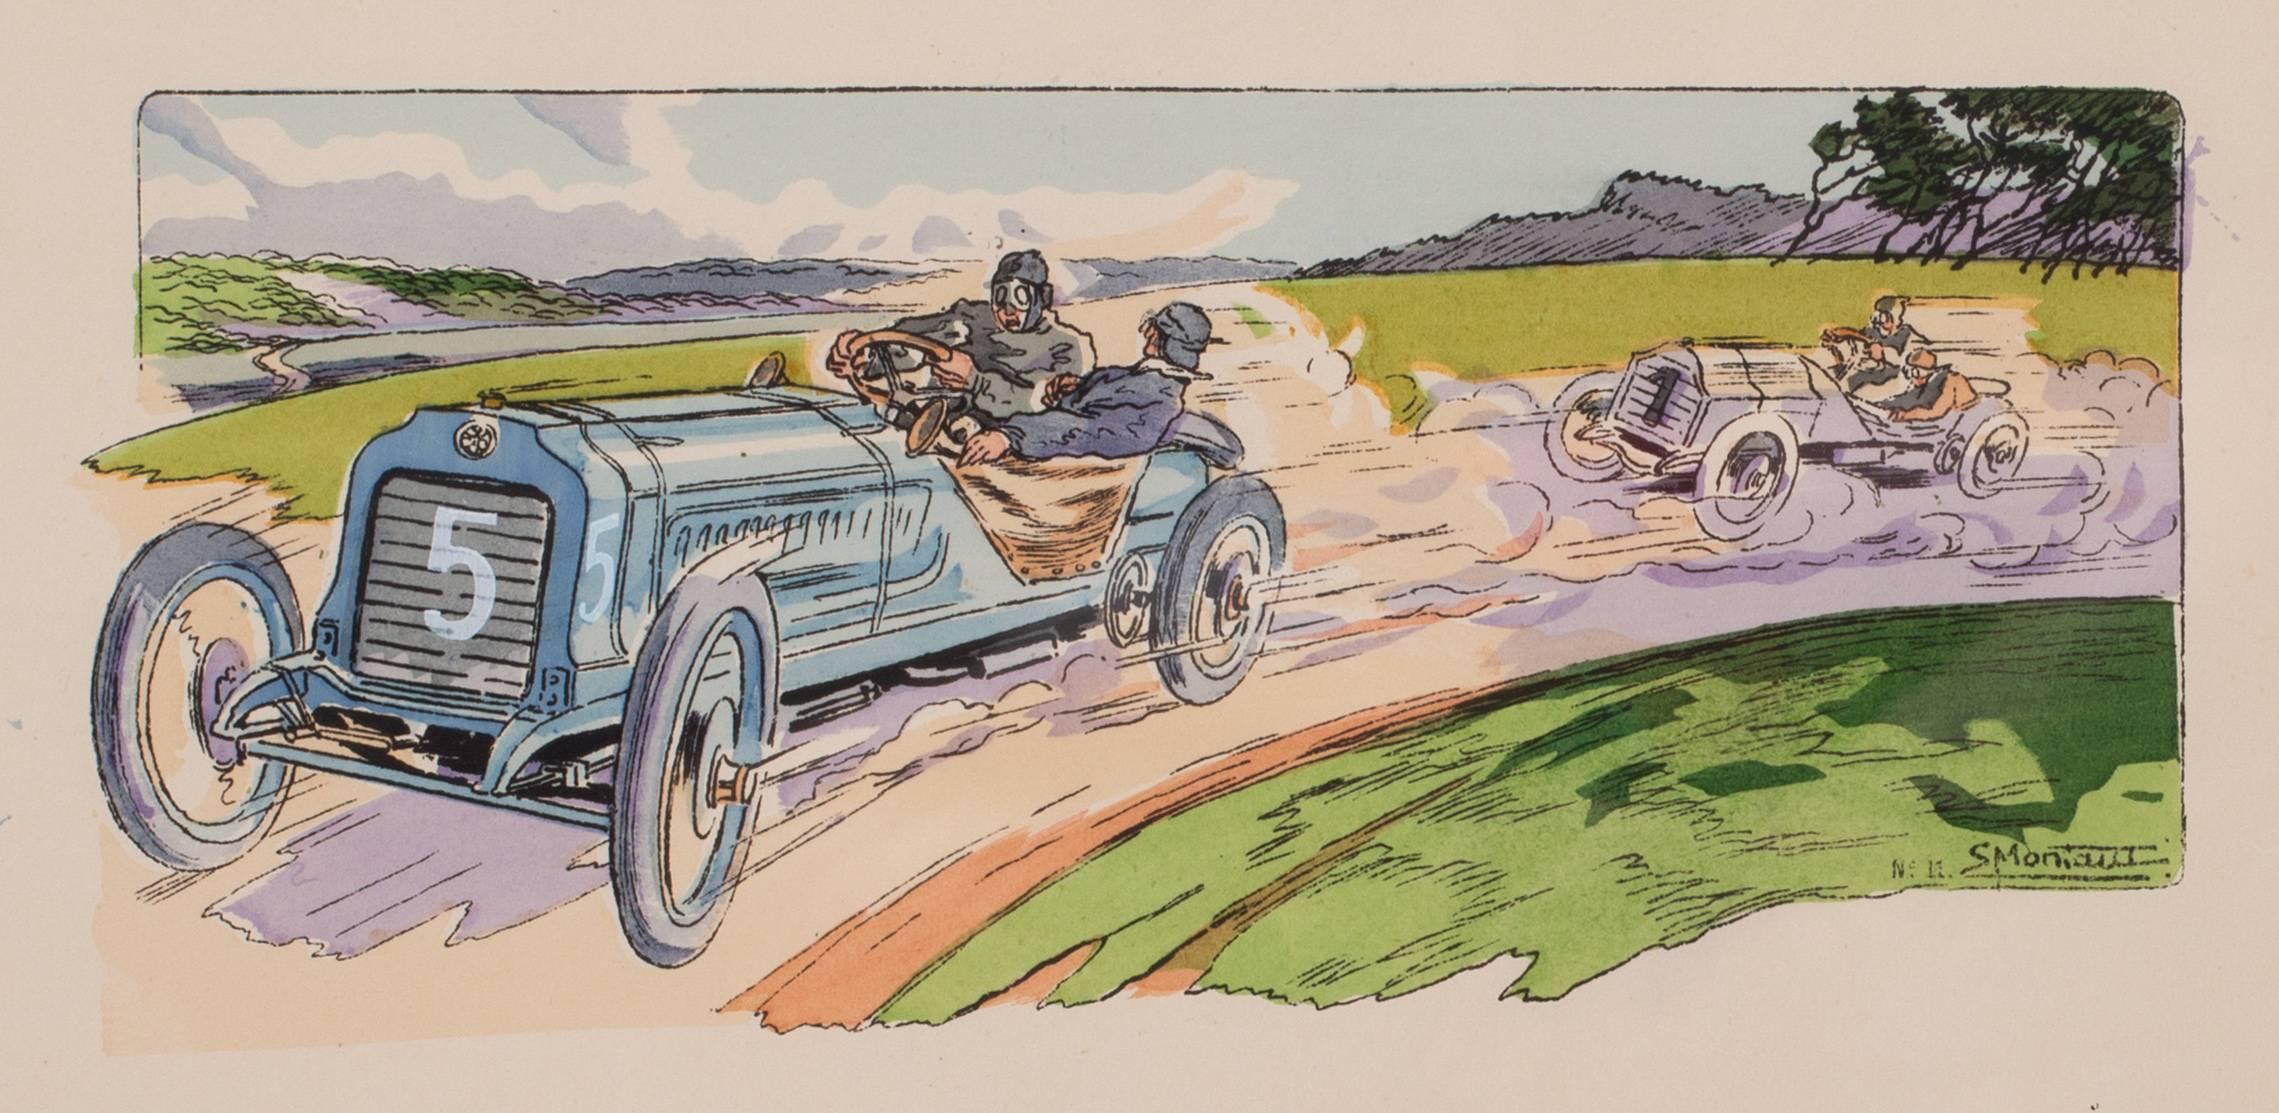 A rare and original turn of the 20th C lithograph of classic racing cars - Art Nouveau Print by Ernest Montaut